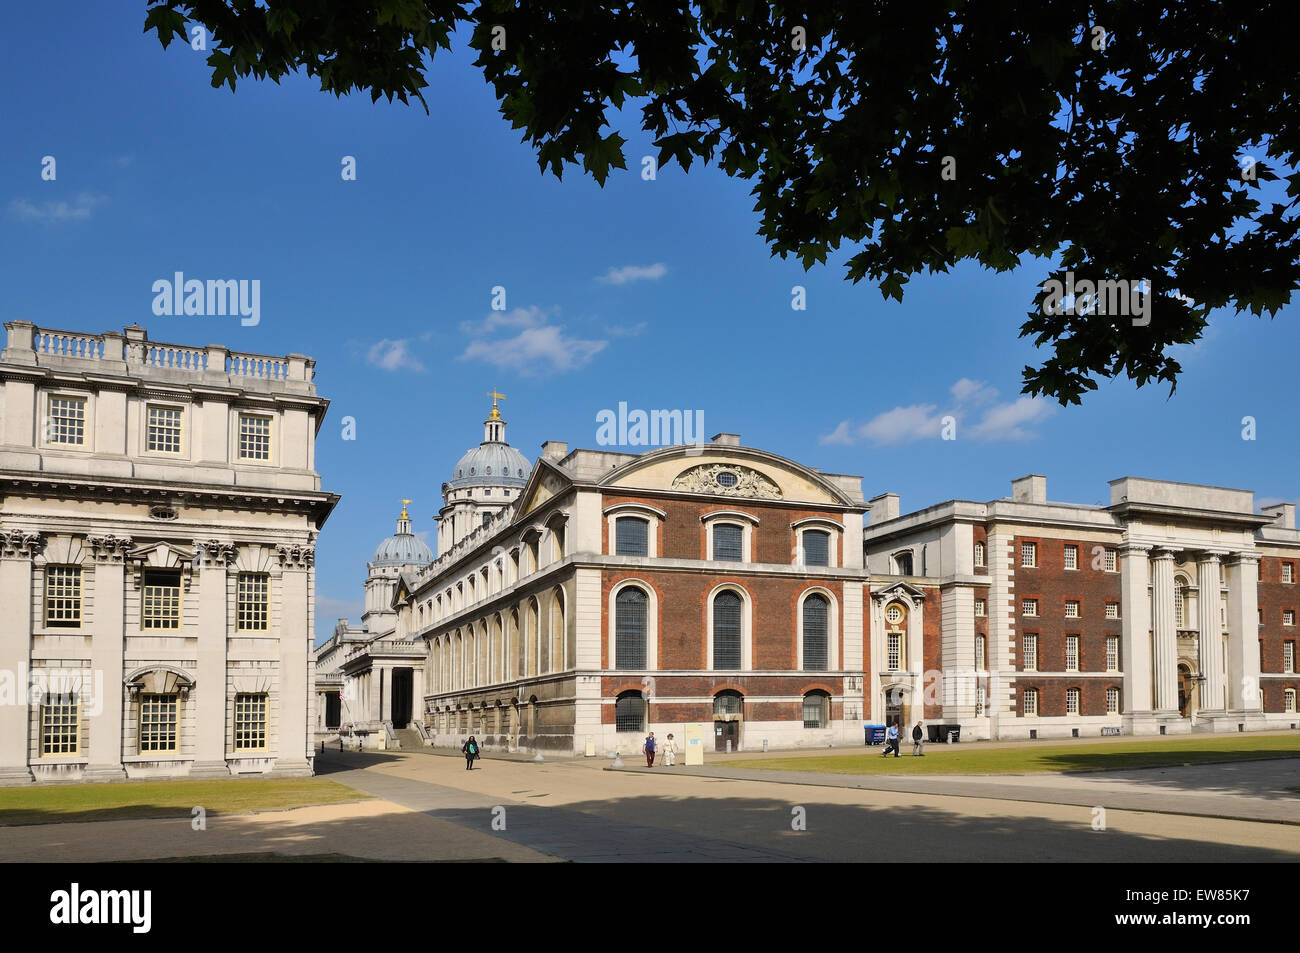 The historic Old Royal Naval College, Greenwich, London UK, viewed from the west side Stock Photo